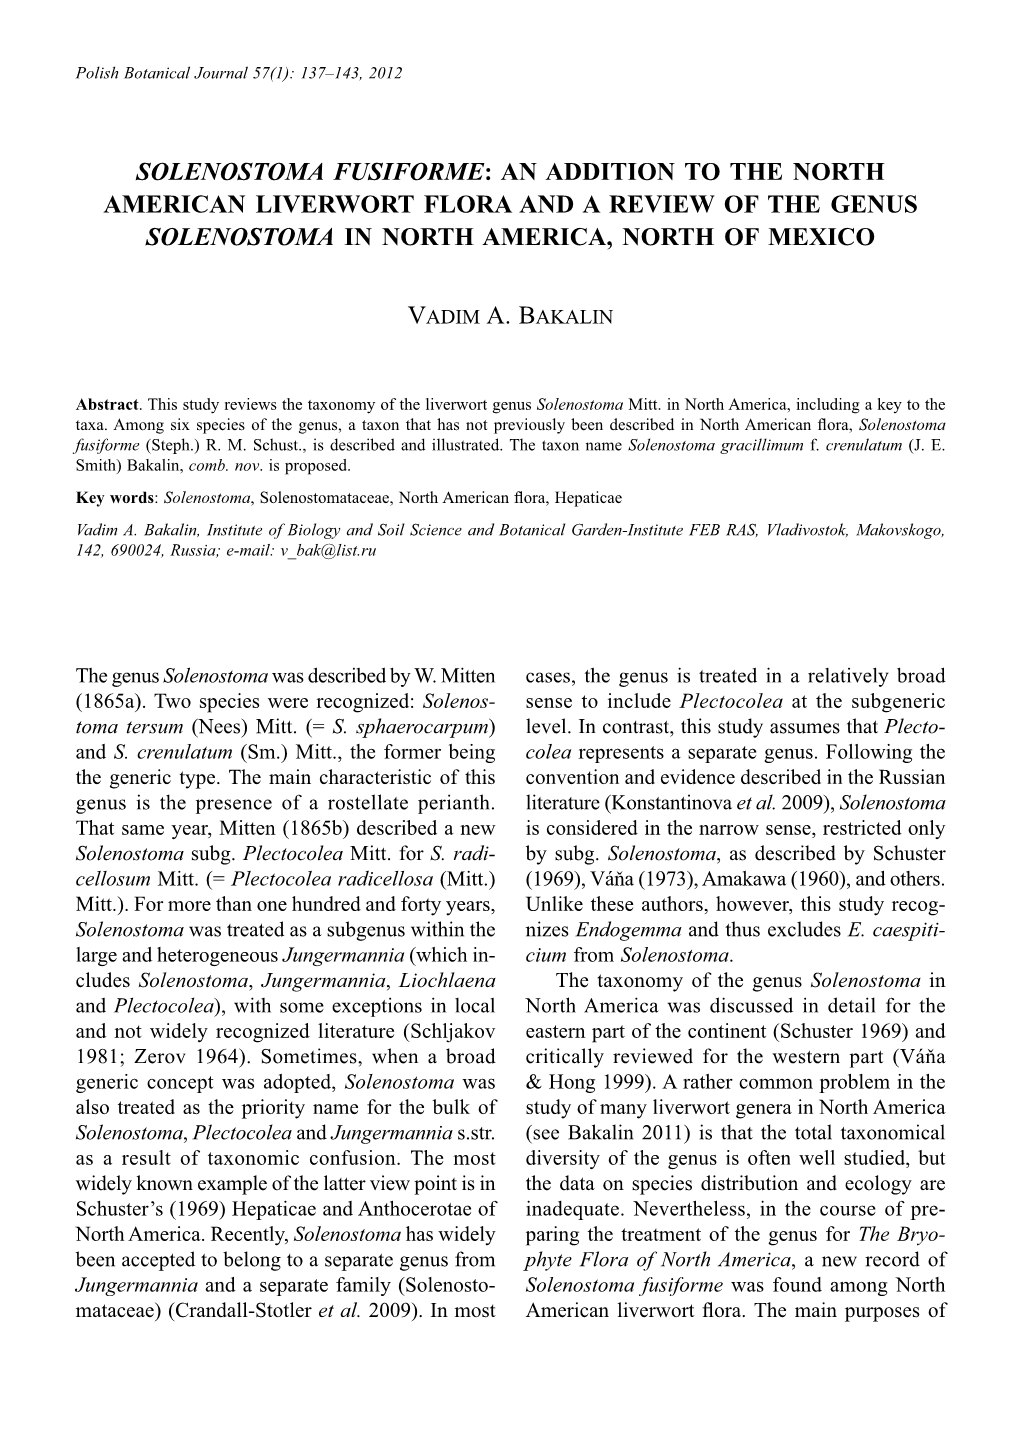 Solenostoma Fusiforme: an Addition to the North American Liverwort Flora and a Review of the Genus Solenostoma in North America, North of Mexico